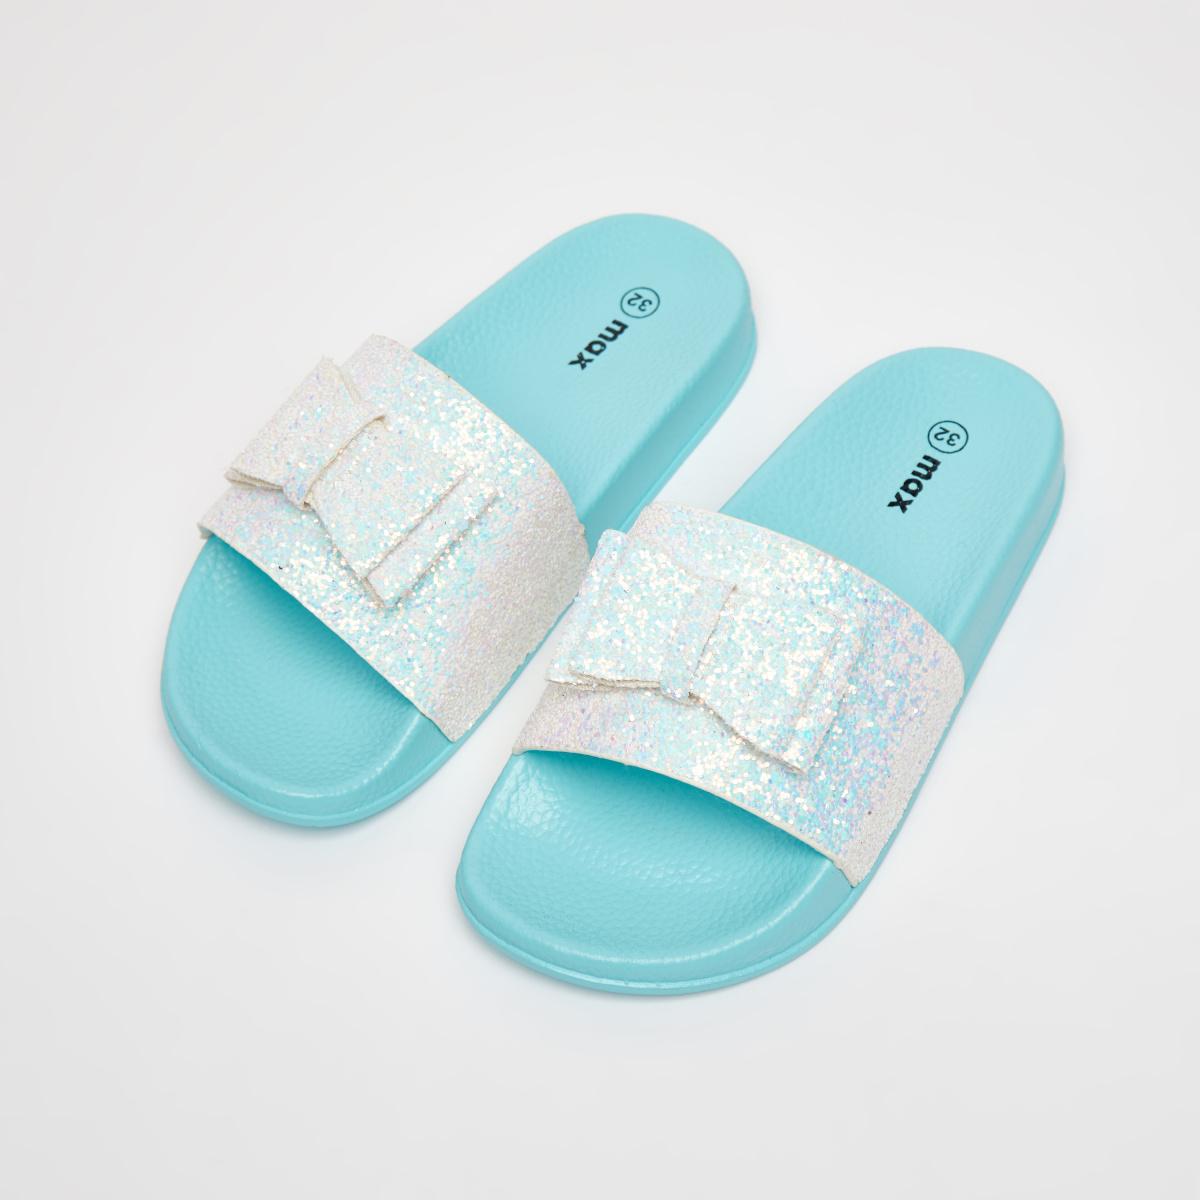 Textured Slip-On Slides with Bow and Glitter Accent